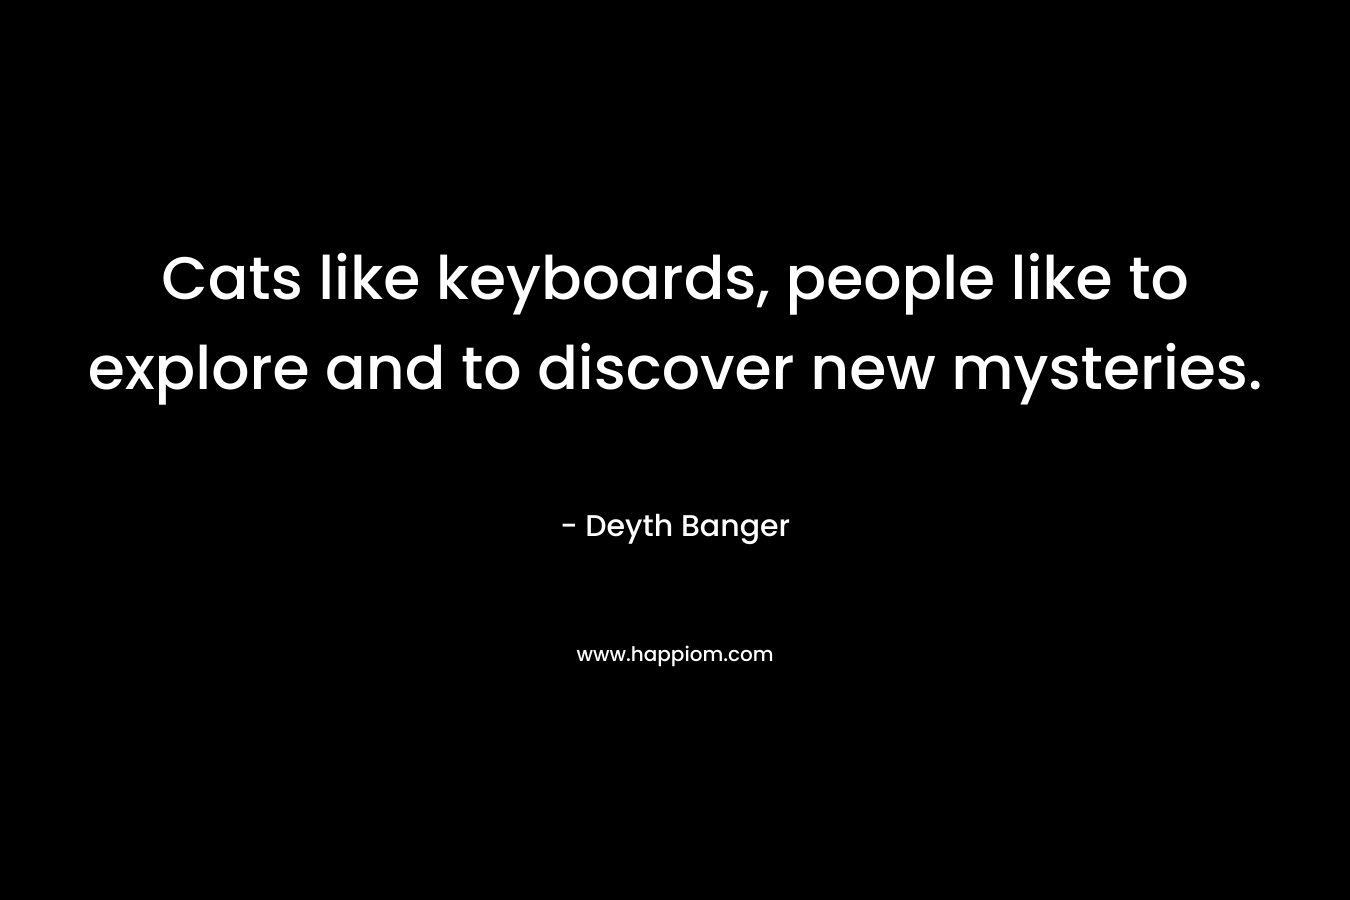 Cats like keyboards, people like to explore and to discover new mysteries. – Deyth Banger